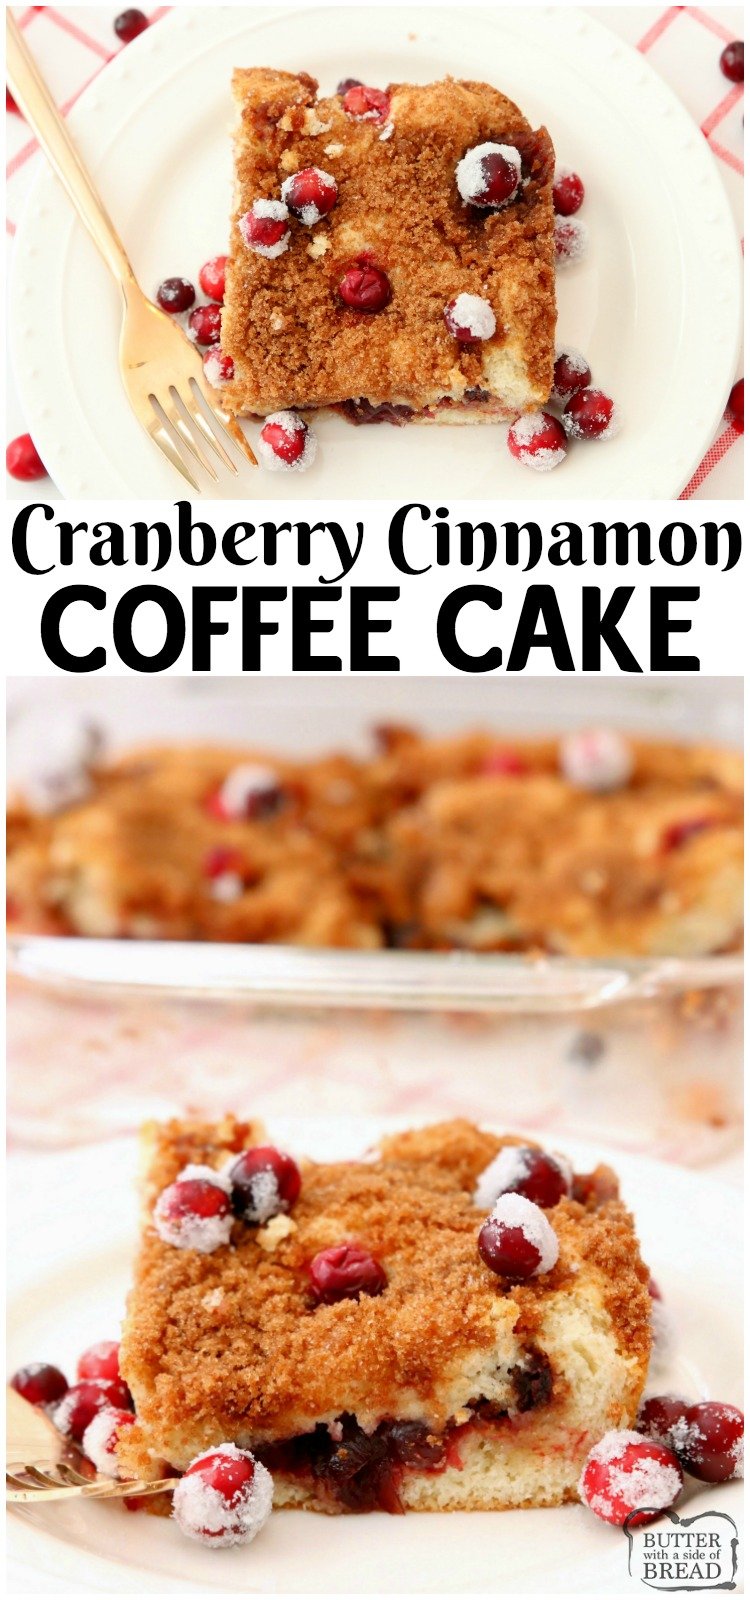 Cranberry Cinnamon Coffee Cake recipe made with just 4 ingredients! Festive & easy coffee cake recipe perfect for holiday breakfasts. #coffeecake #cranberry #cinnamon #baking #breakfast #recipe from BUTTER WITH A SIDE OF BREAD